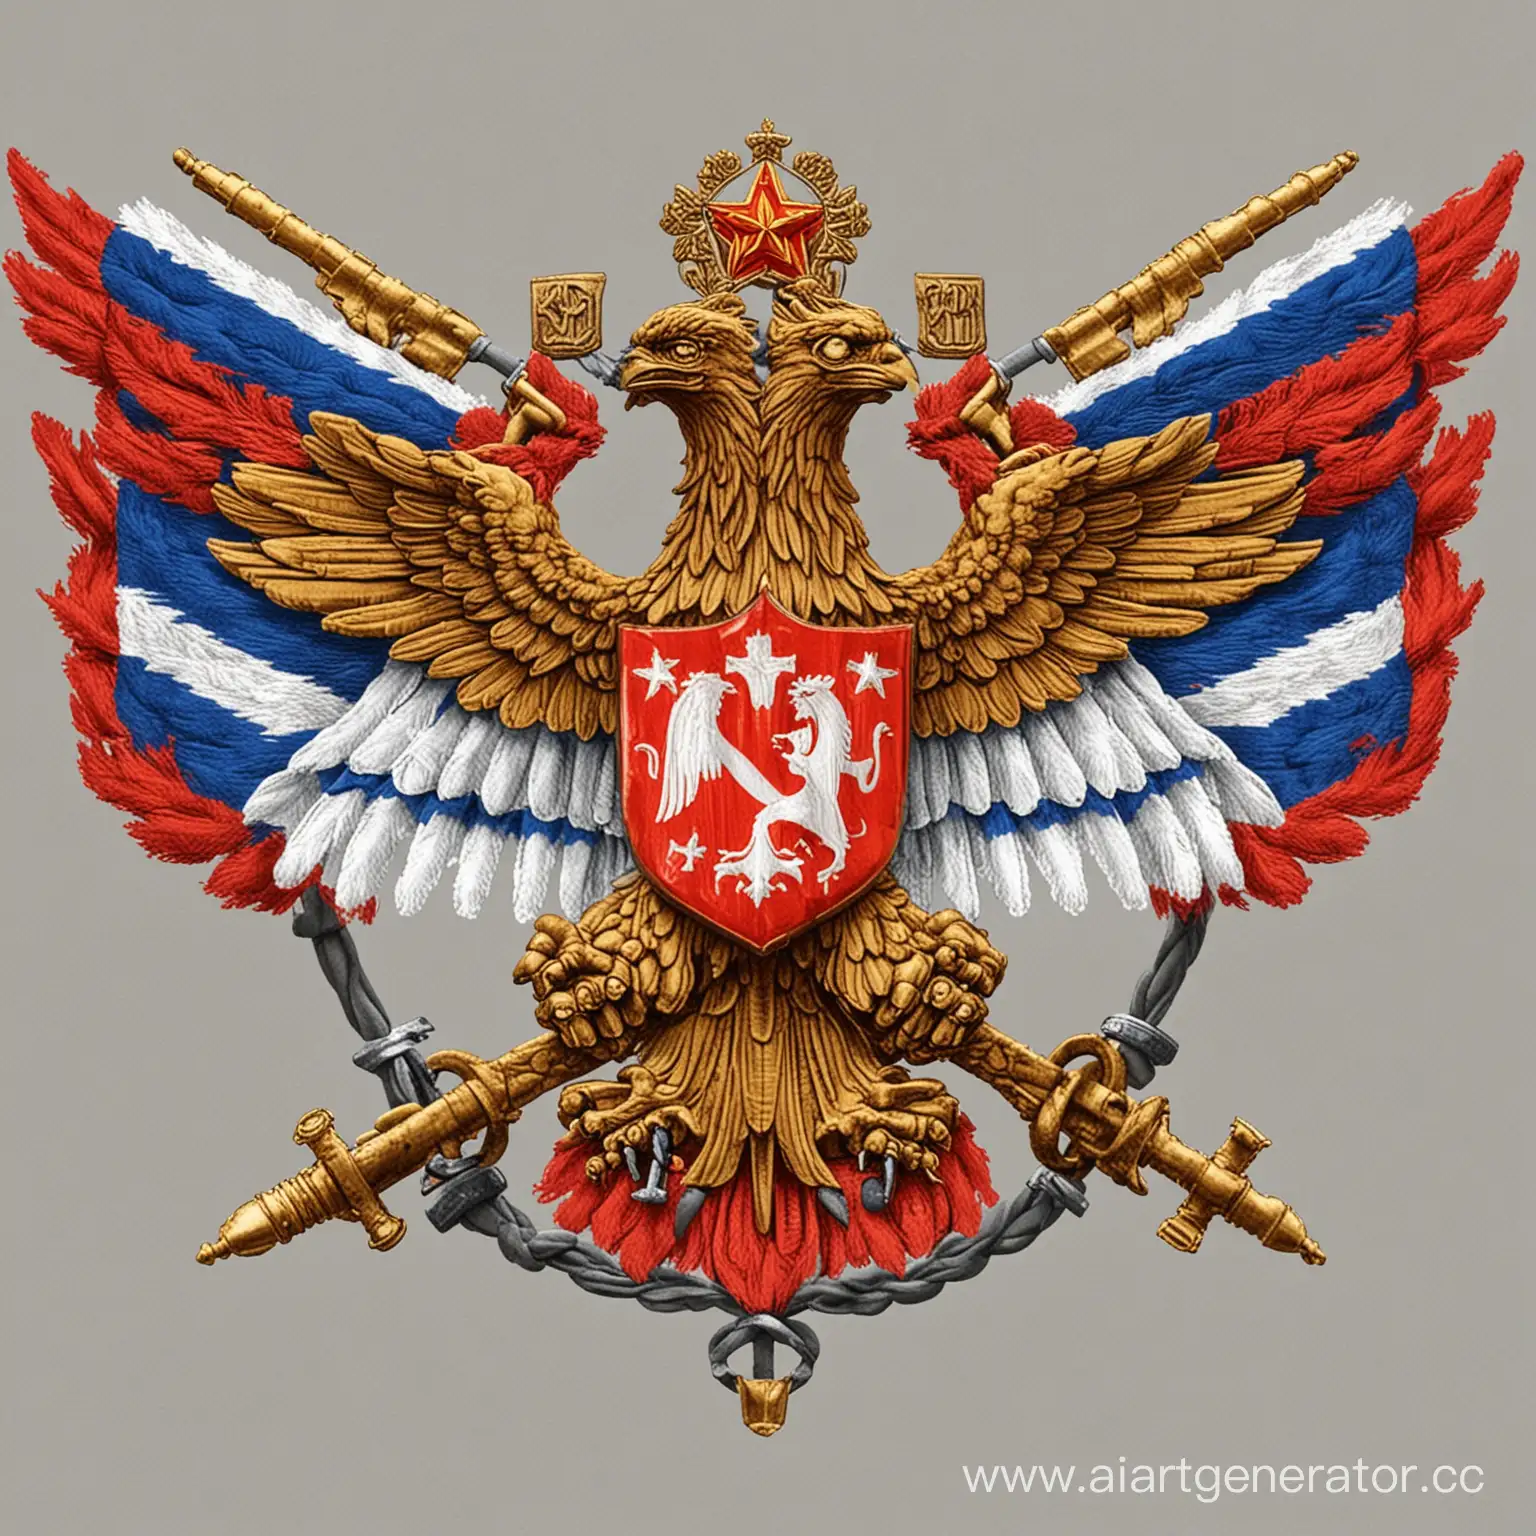 Russian-National-Guard-Emblem-on-Military-Aircraft-and-Helicopter